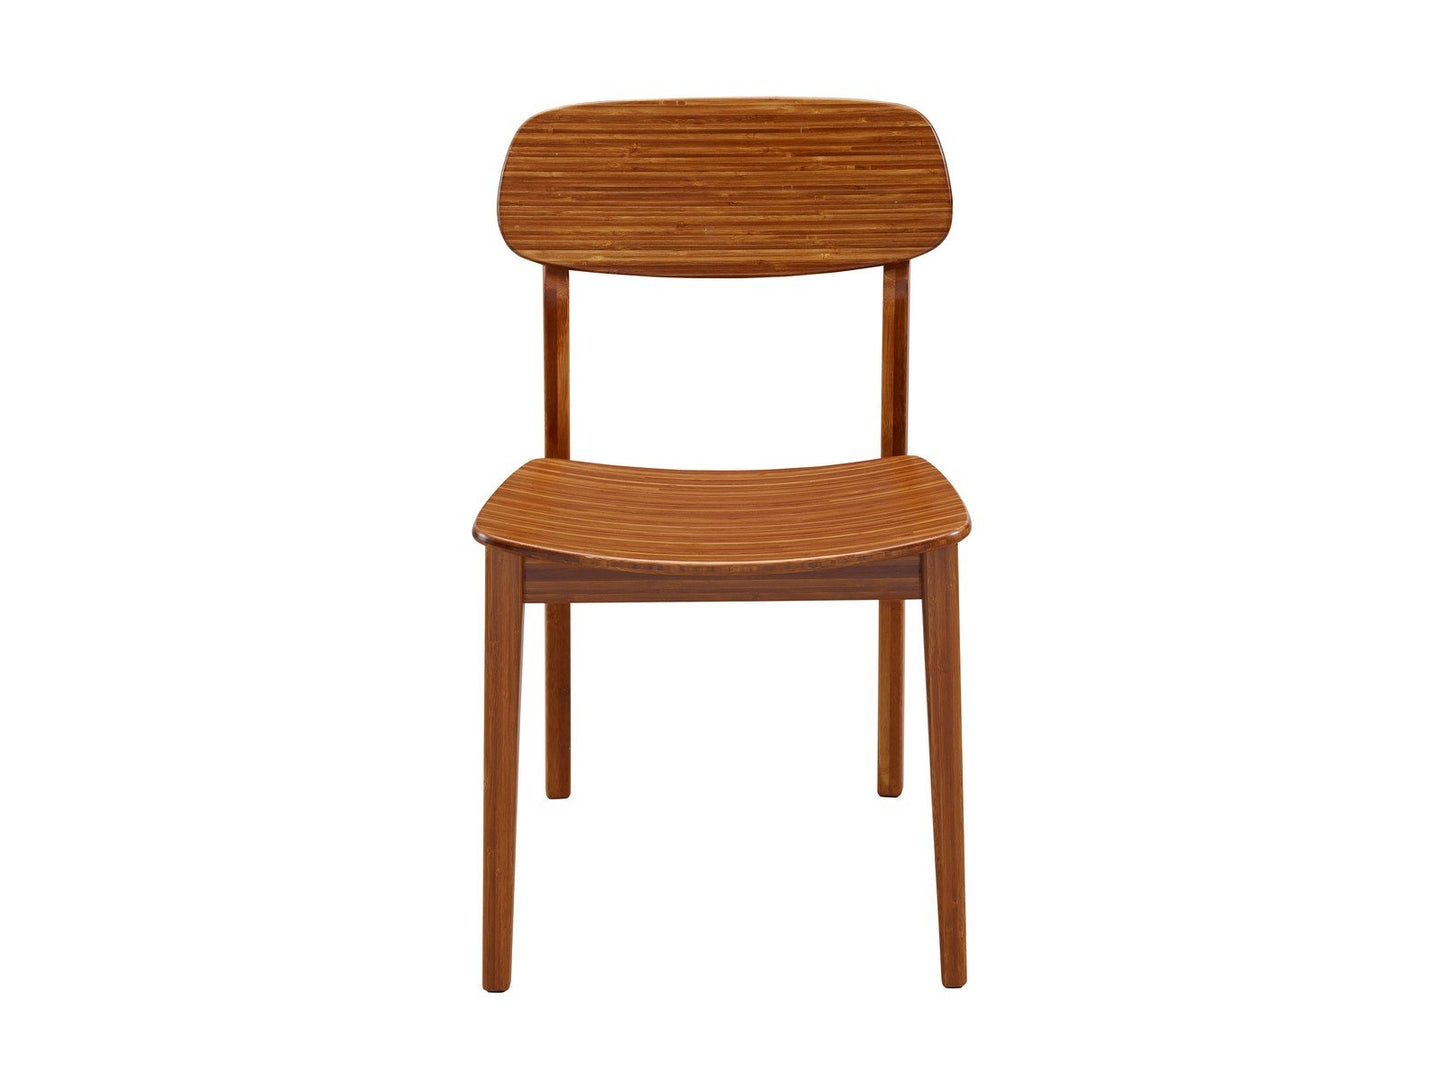 Greenington Currant Chair - Boxed set of 2, Amber - G0023AM - 4